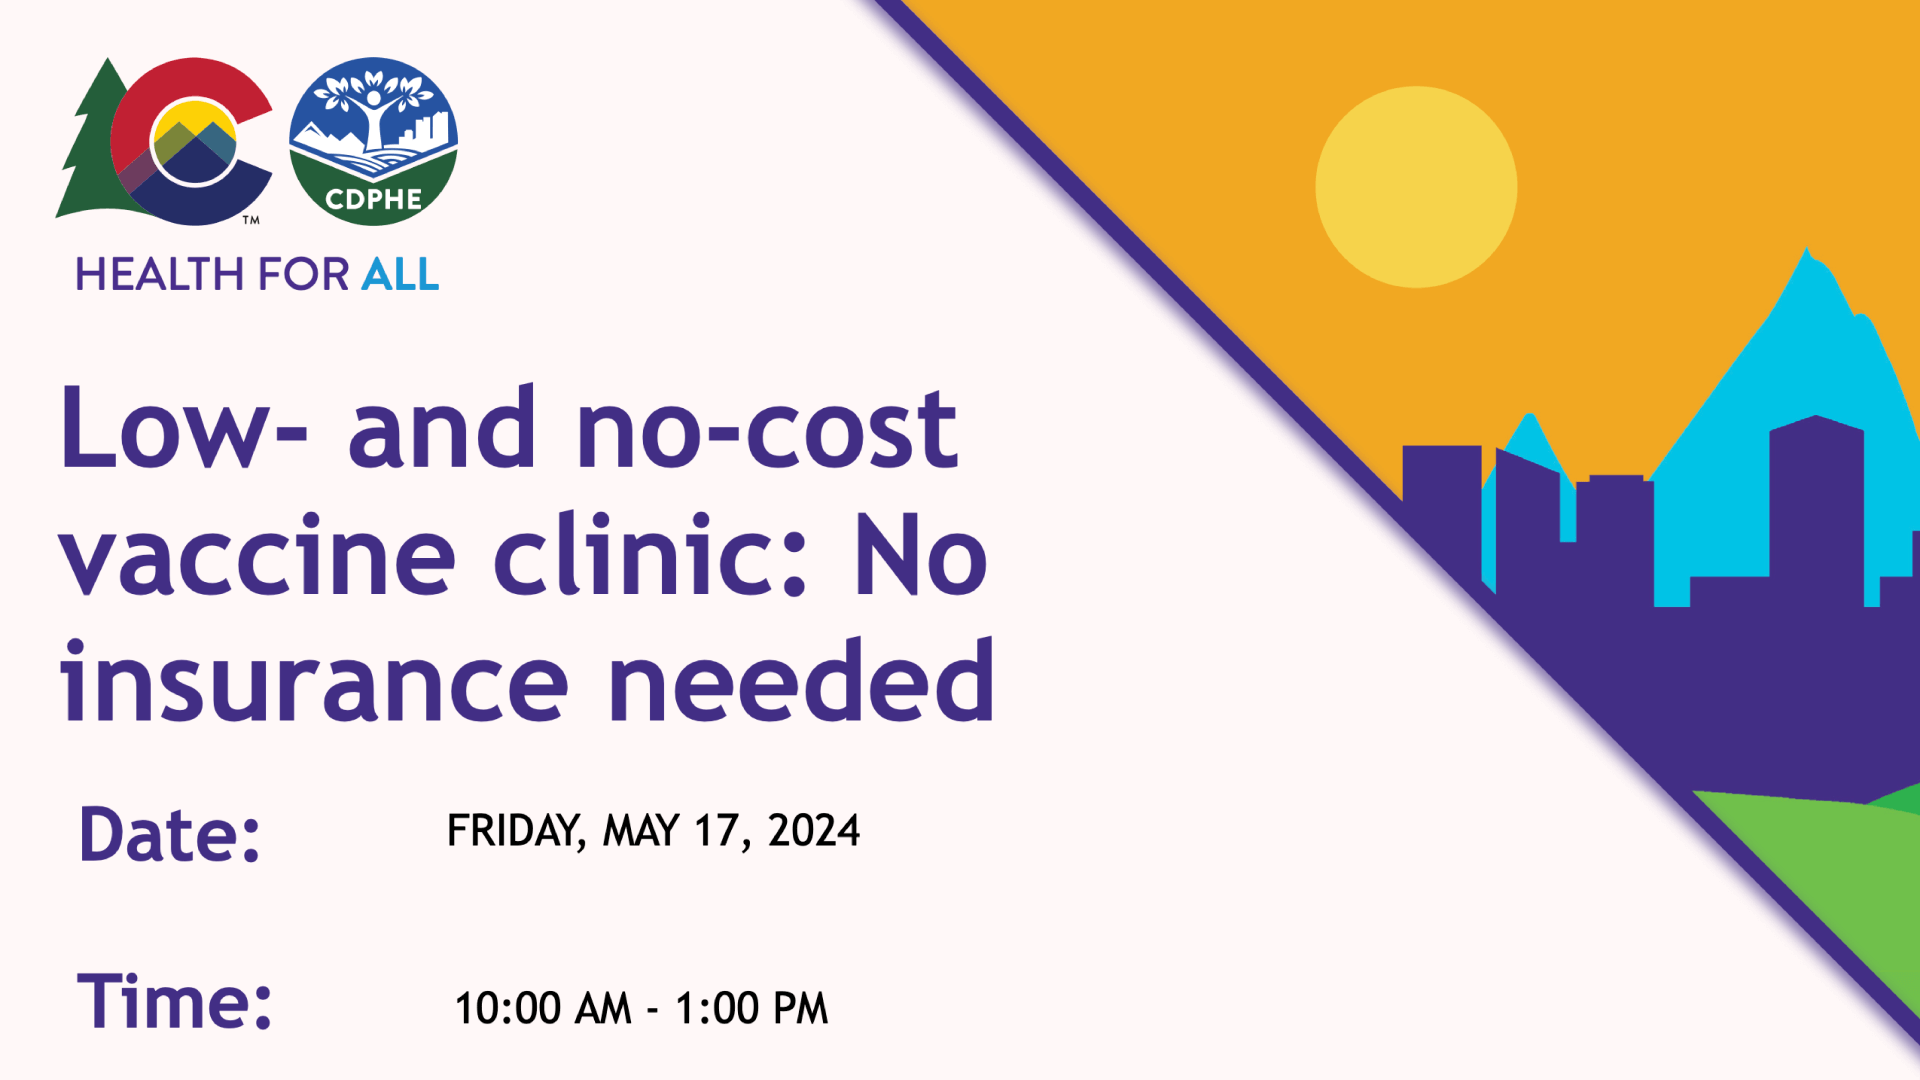 CDPHE Mpox and covid vaccine clinic - Friday, May 17, 2024, 10:00 AM - 1:00 PM